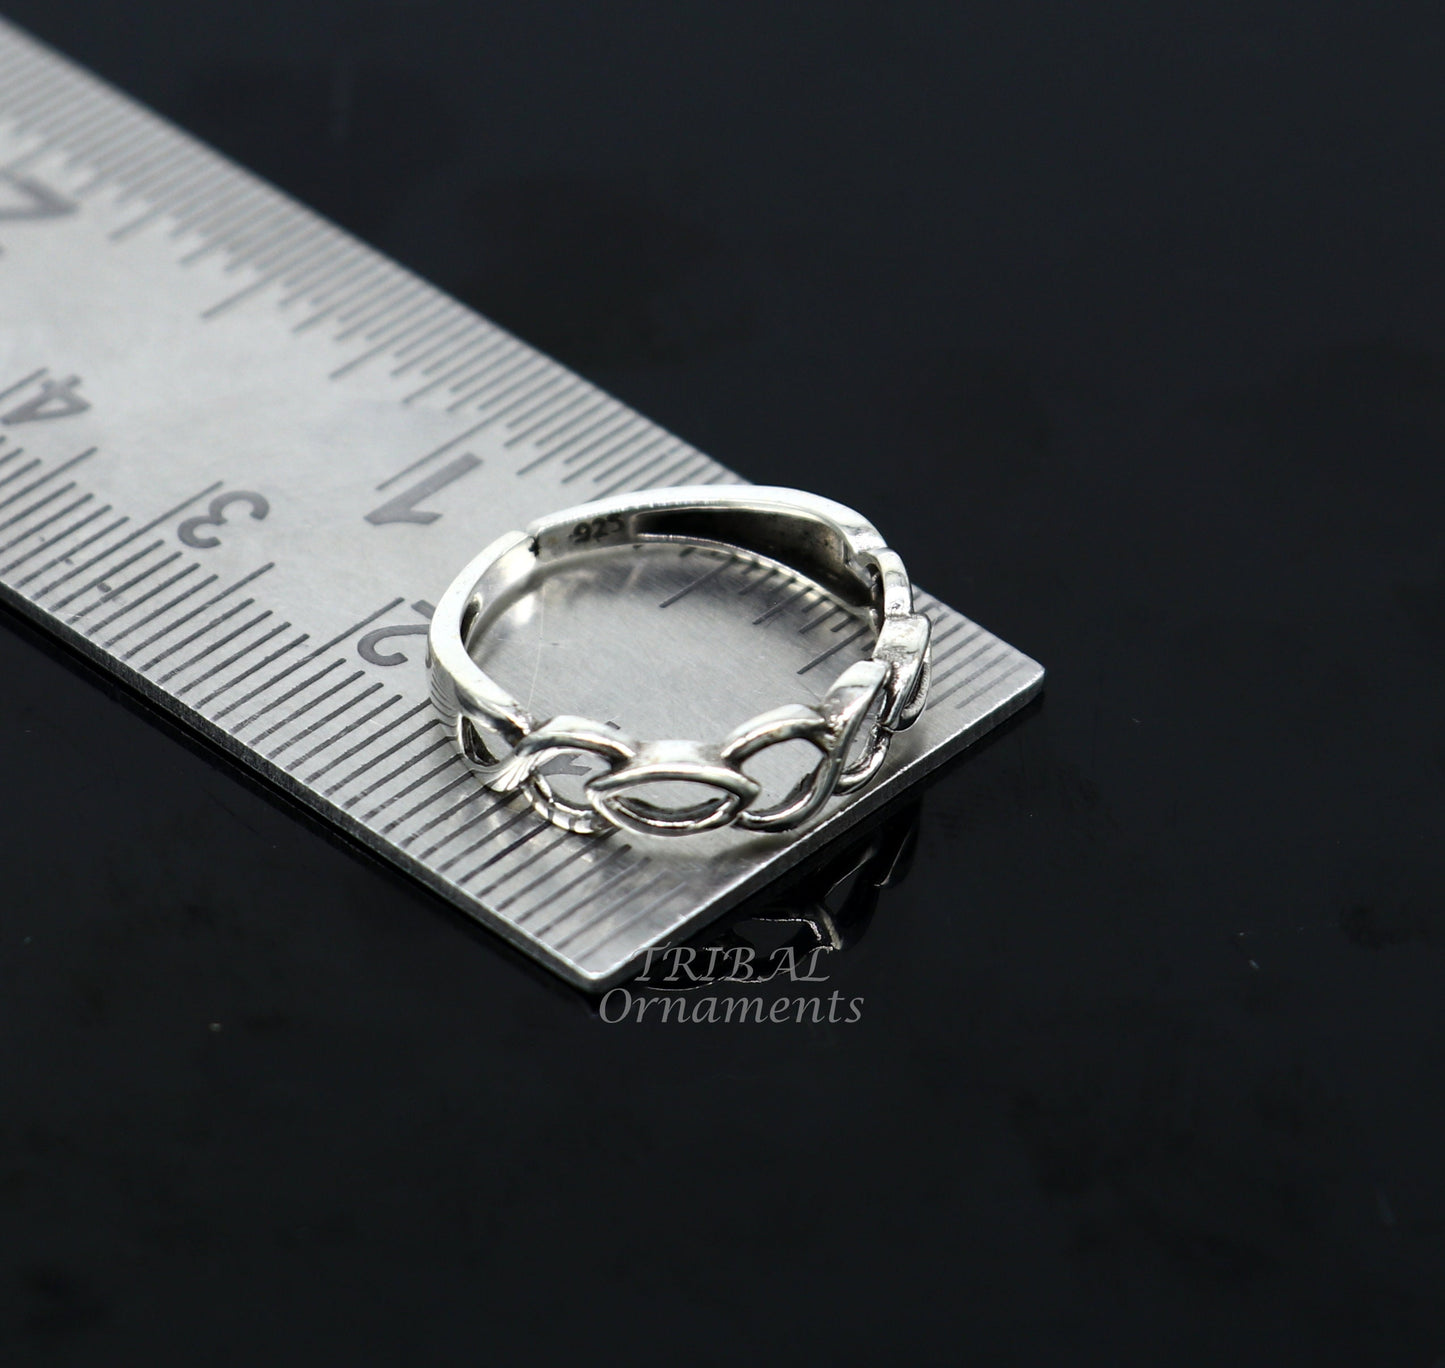 traditional design sterling silver vintage handmade toe ring belly dance women's jewelry awesome tribal jewelry rajasthan India ytr23 - TRIBAL ORNAMENTS